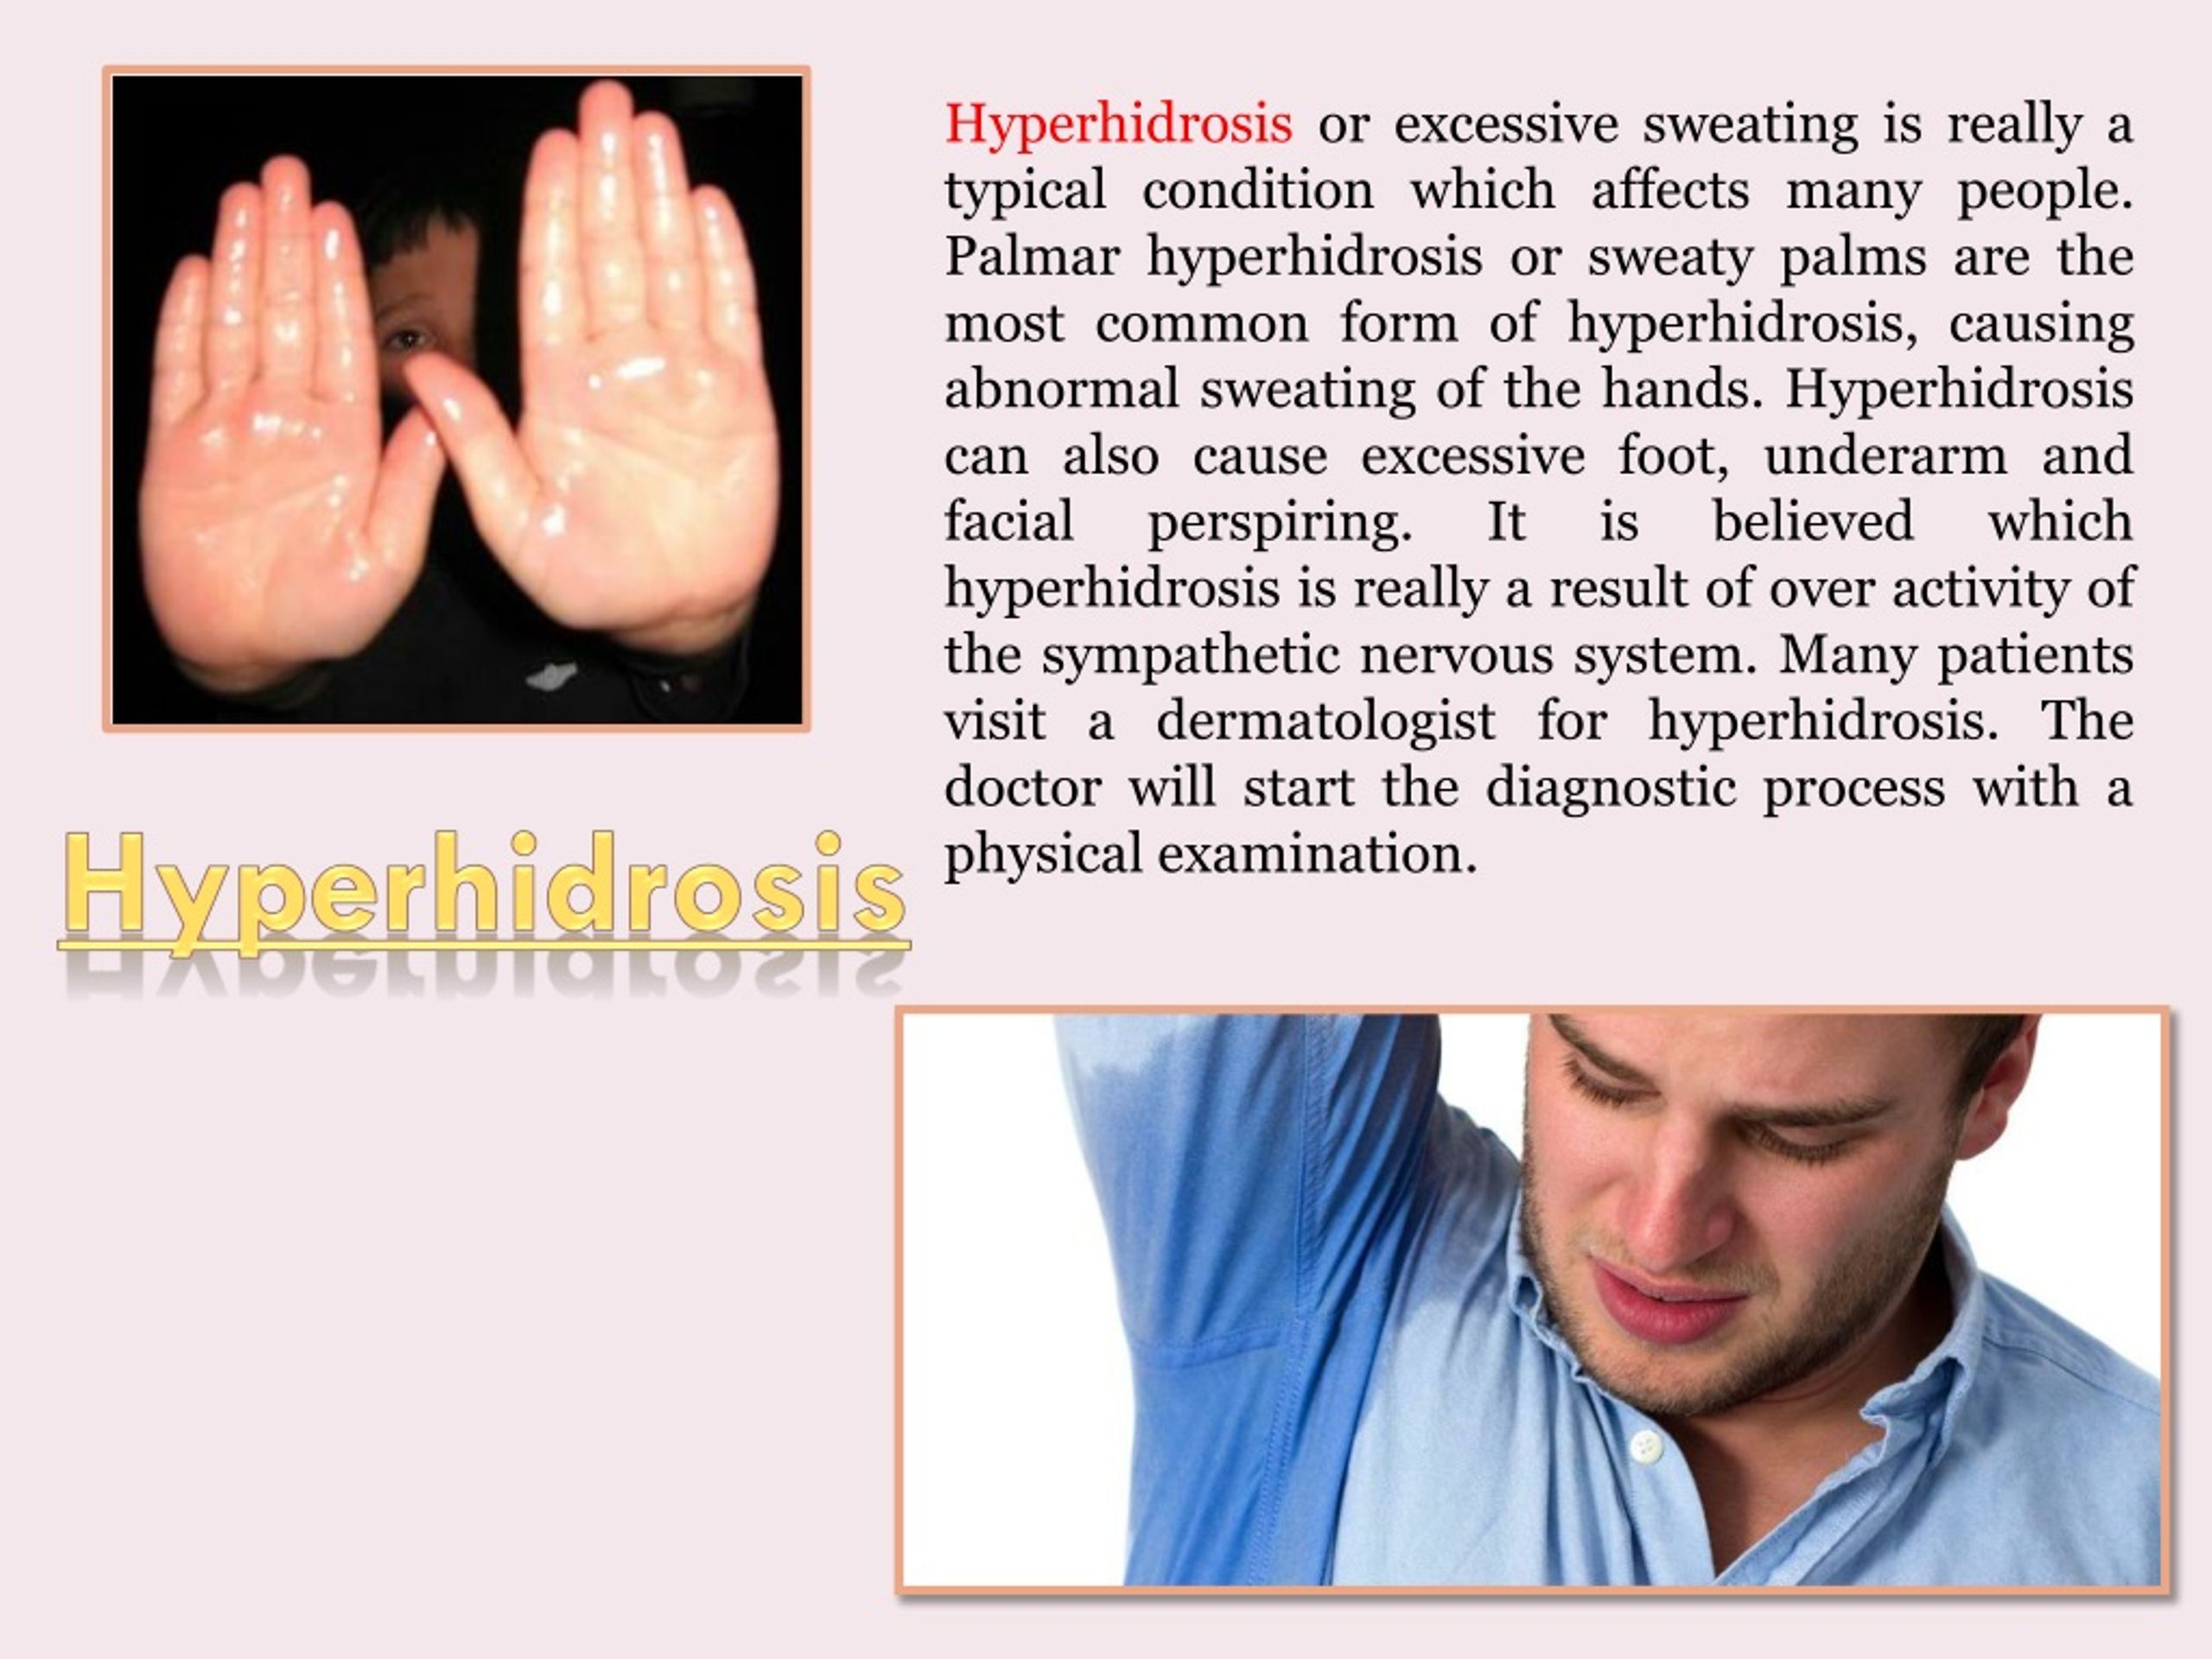 PPT - Hyperhidrosis PowerPoint Presentation, free download - ID:1378664